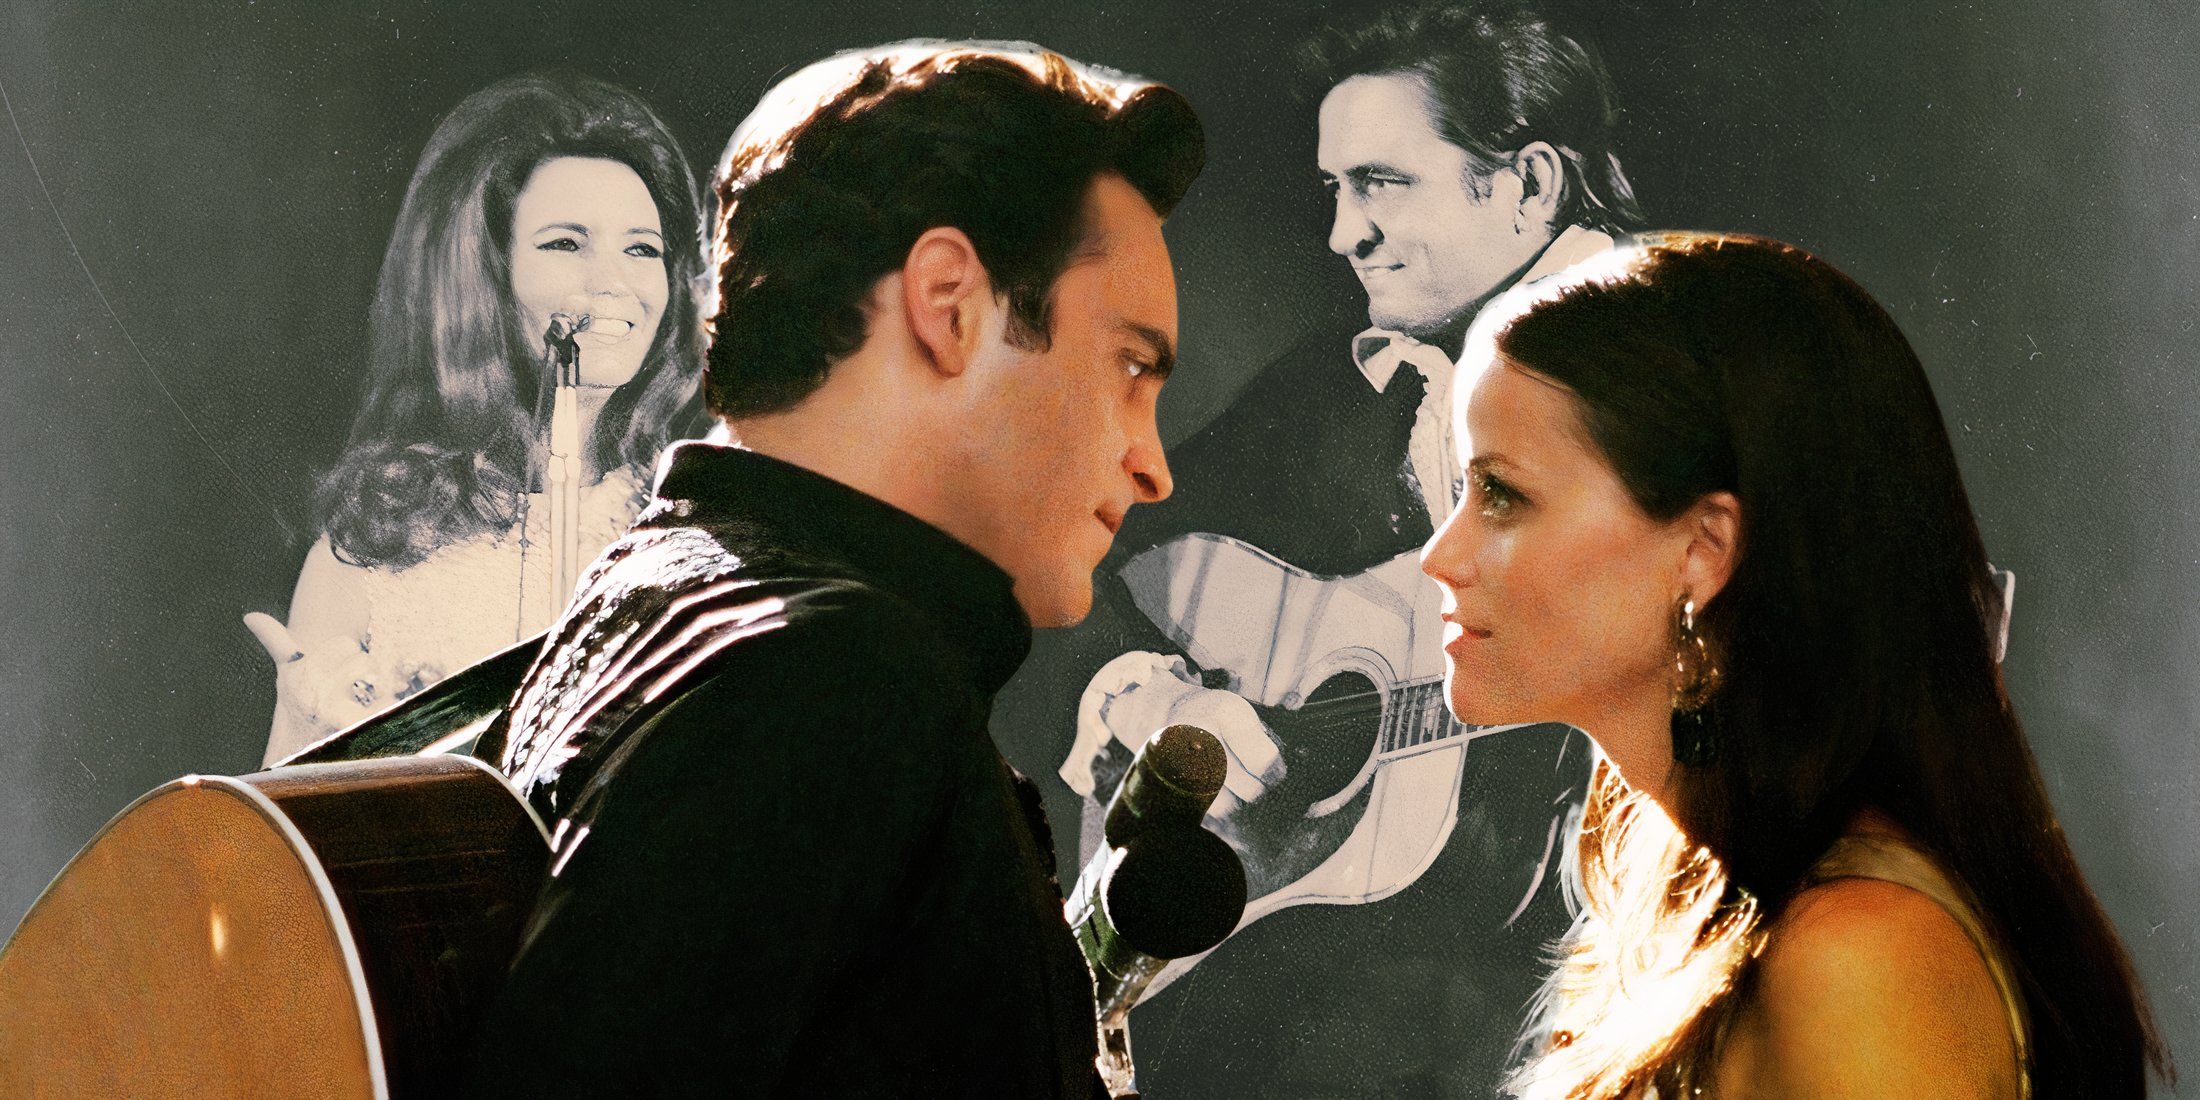 Joaquin Phoenix and Reese Witherspoon in Walk The Line with the real June Carter and Johnny cash behind them